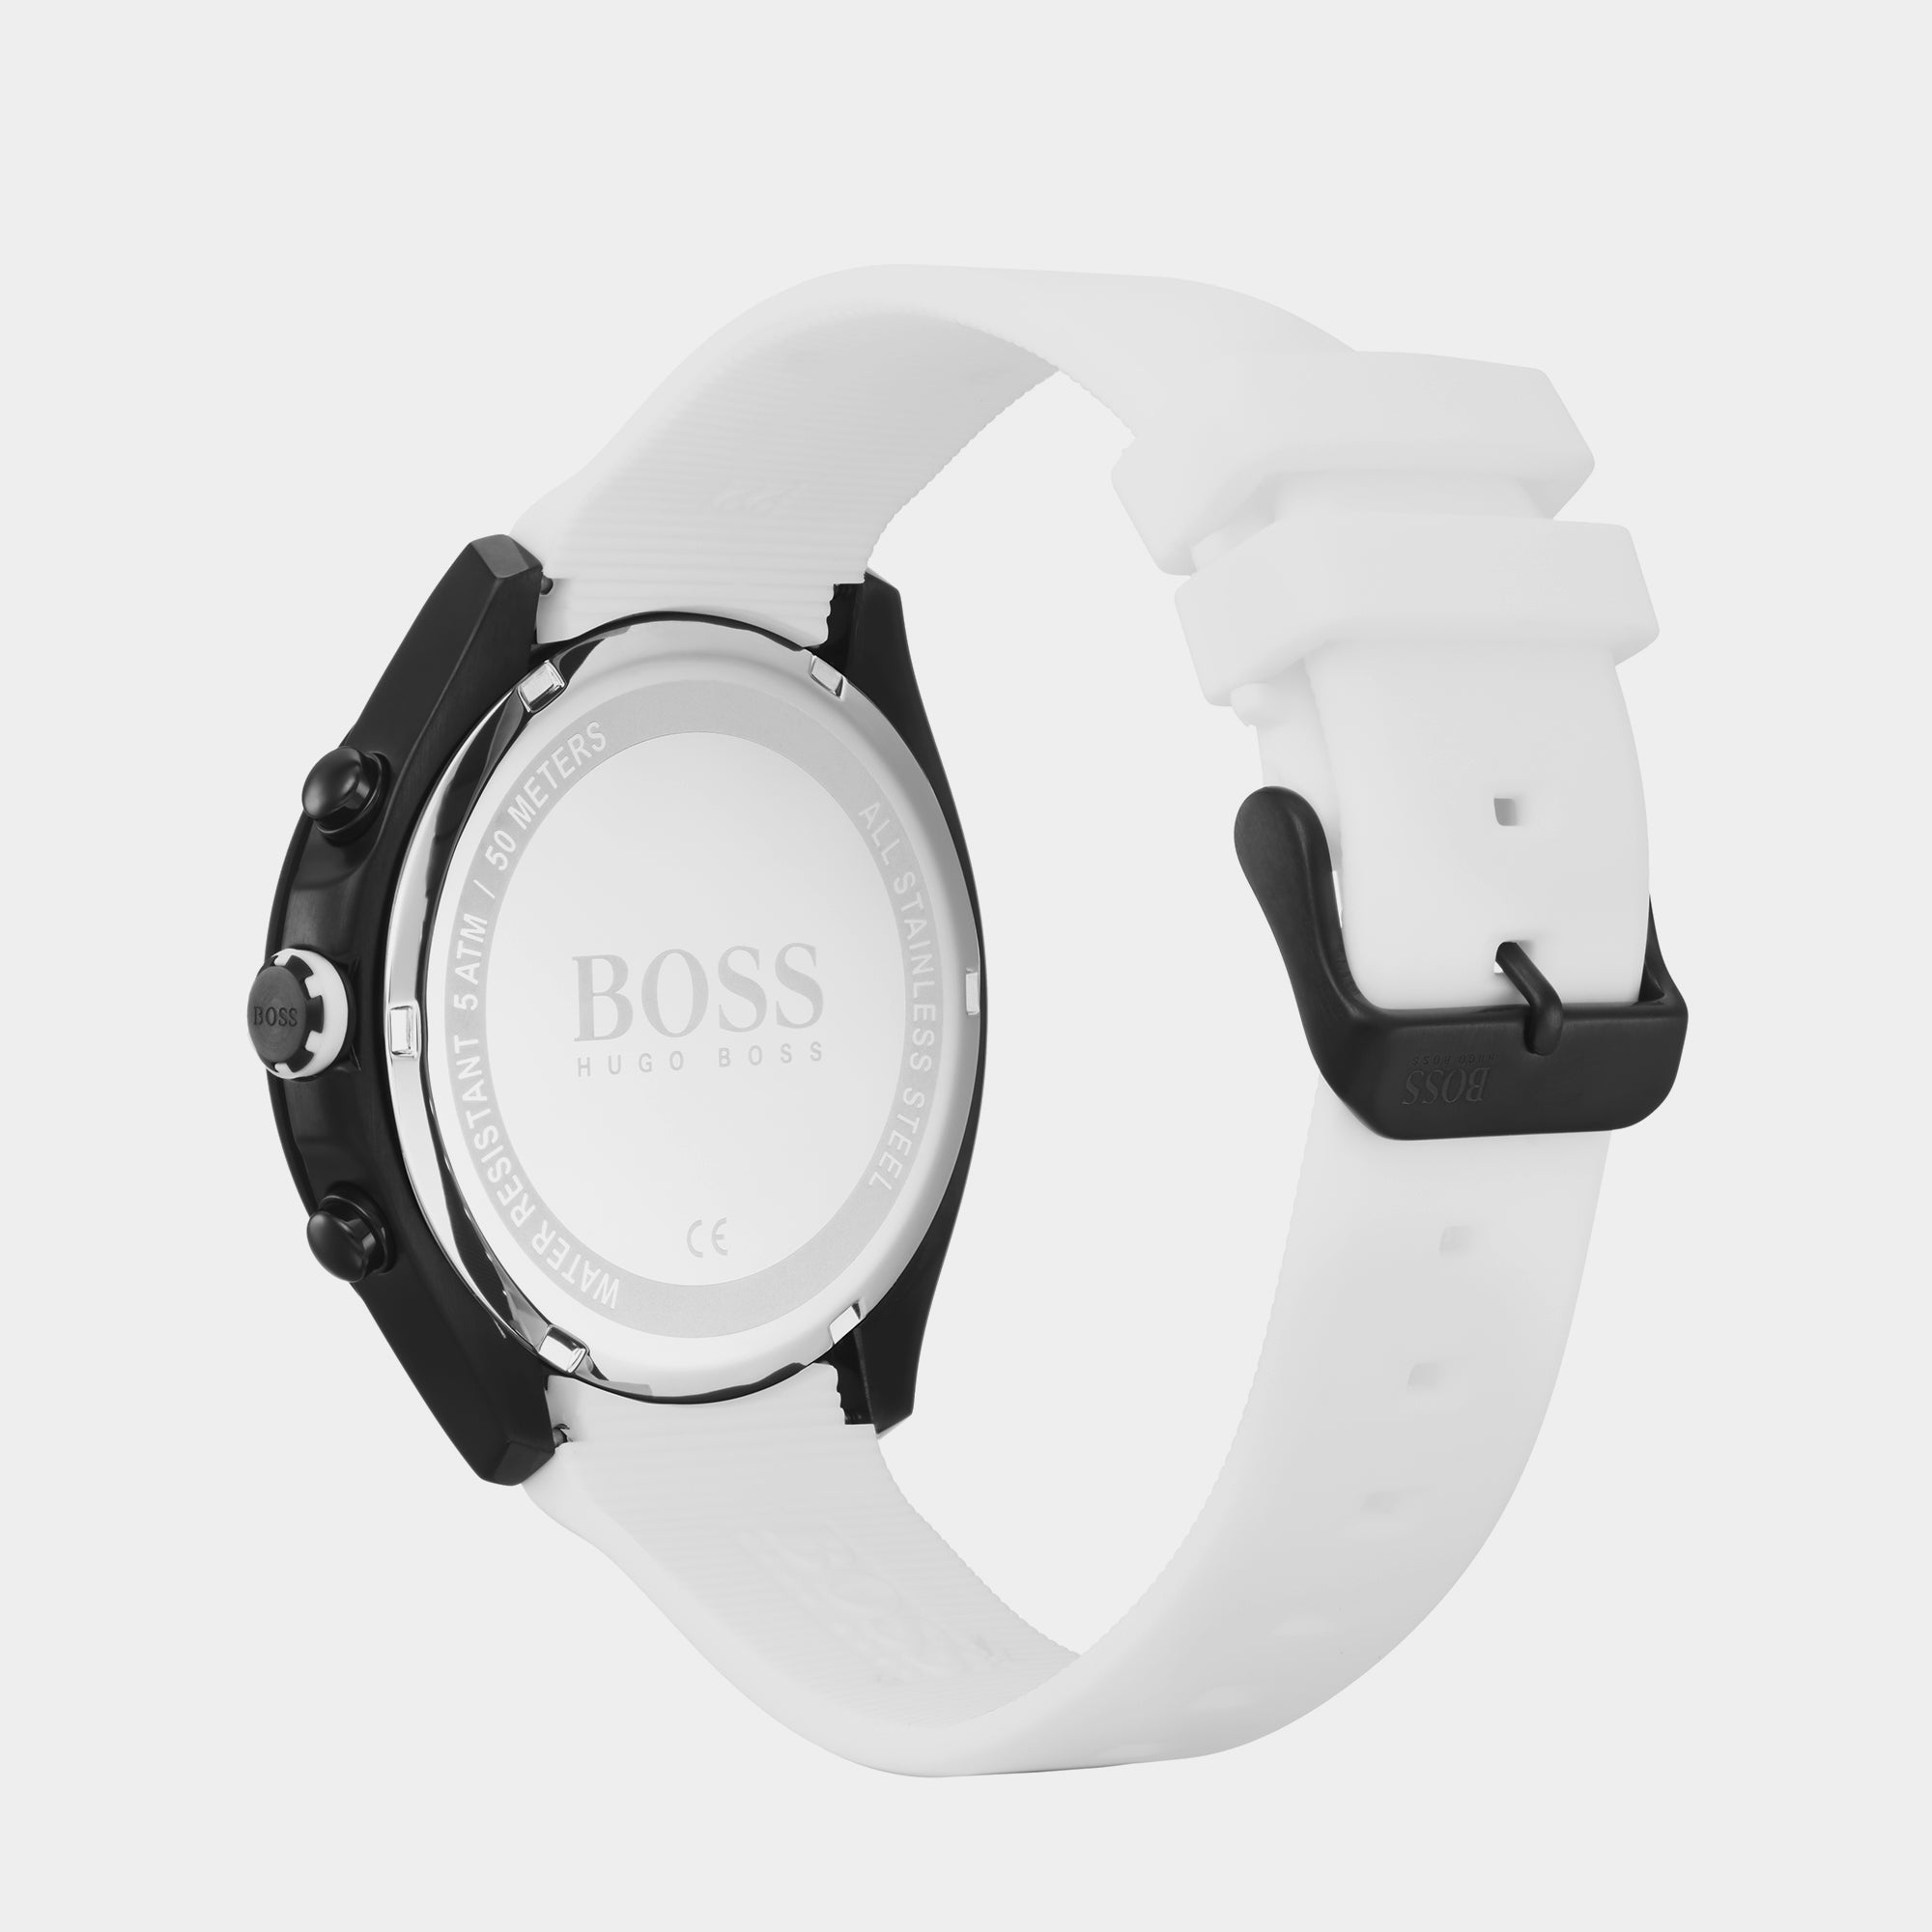 Velosity Watch - Buy Velosity Watch Online at Best Prices in India on  Snapdeal